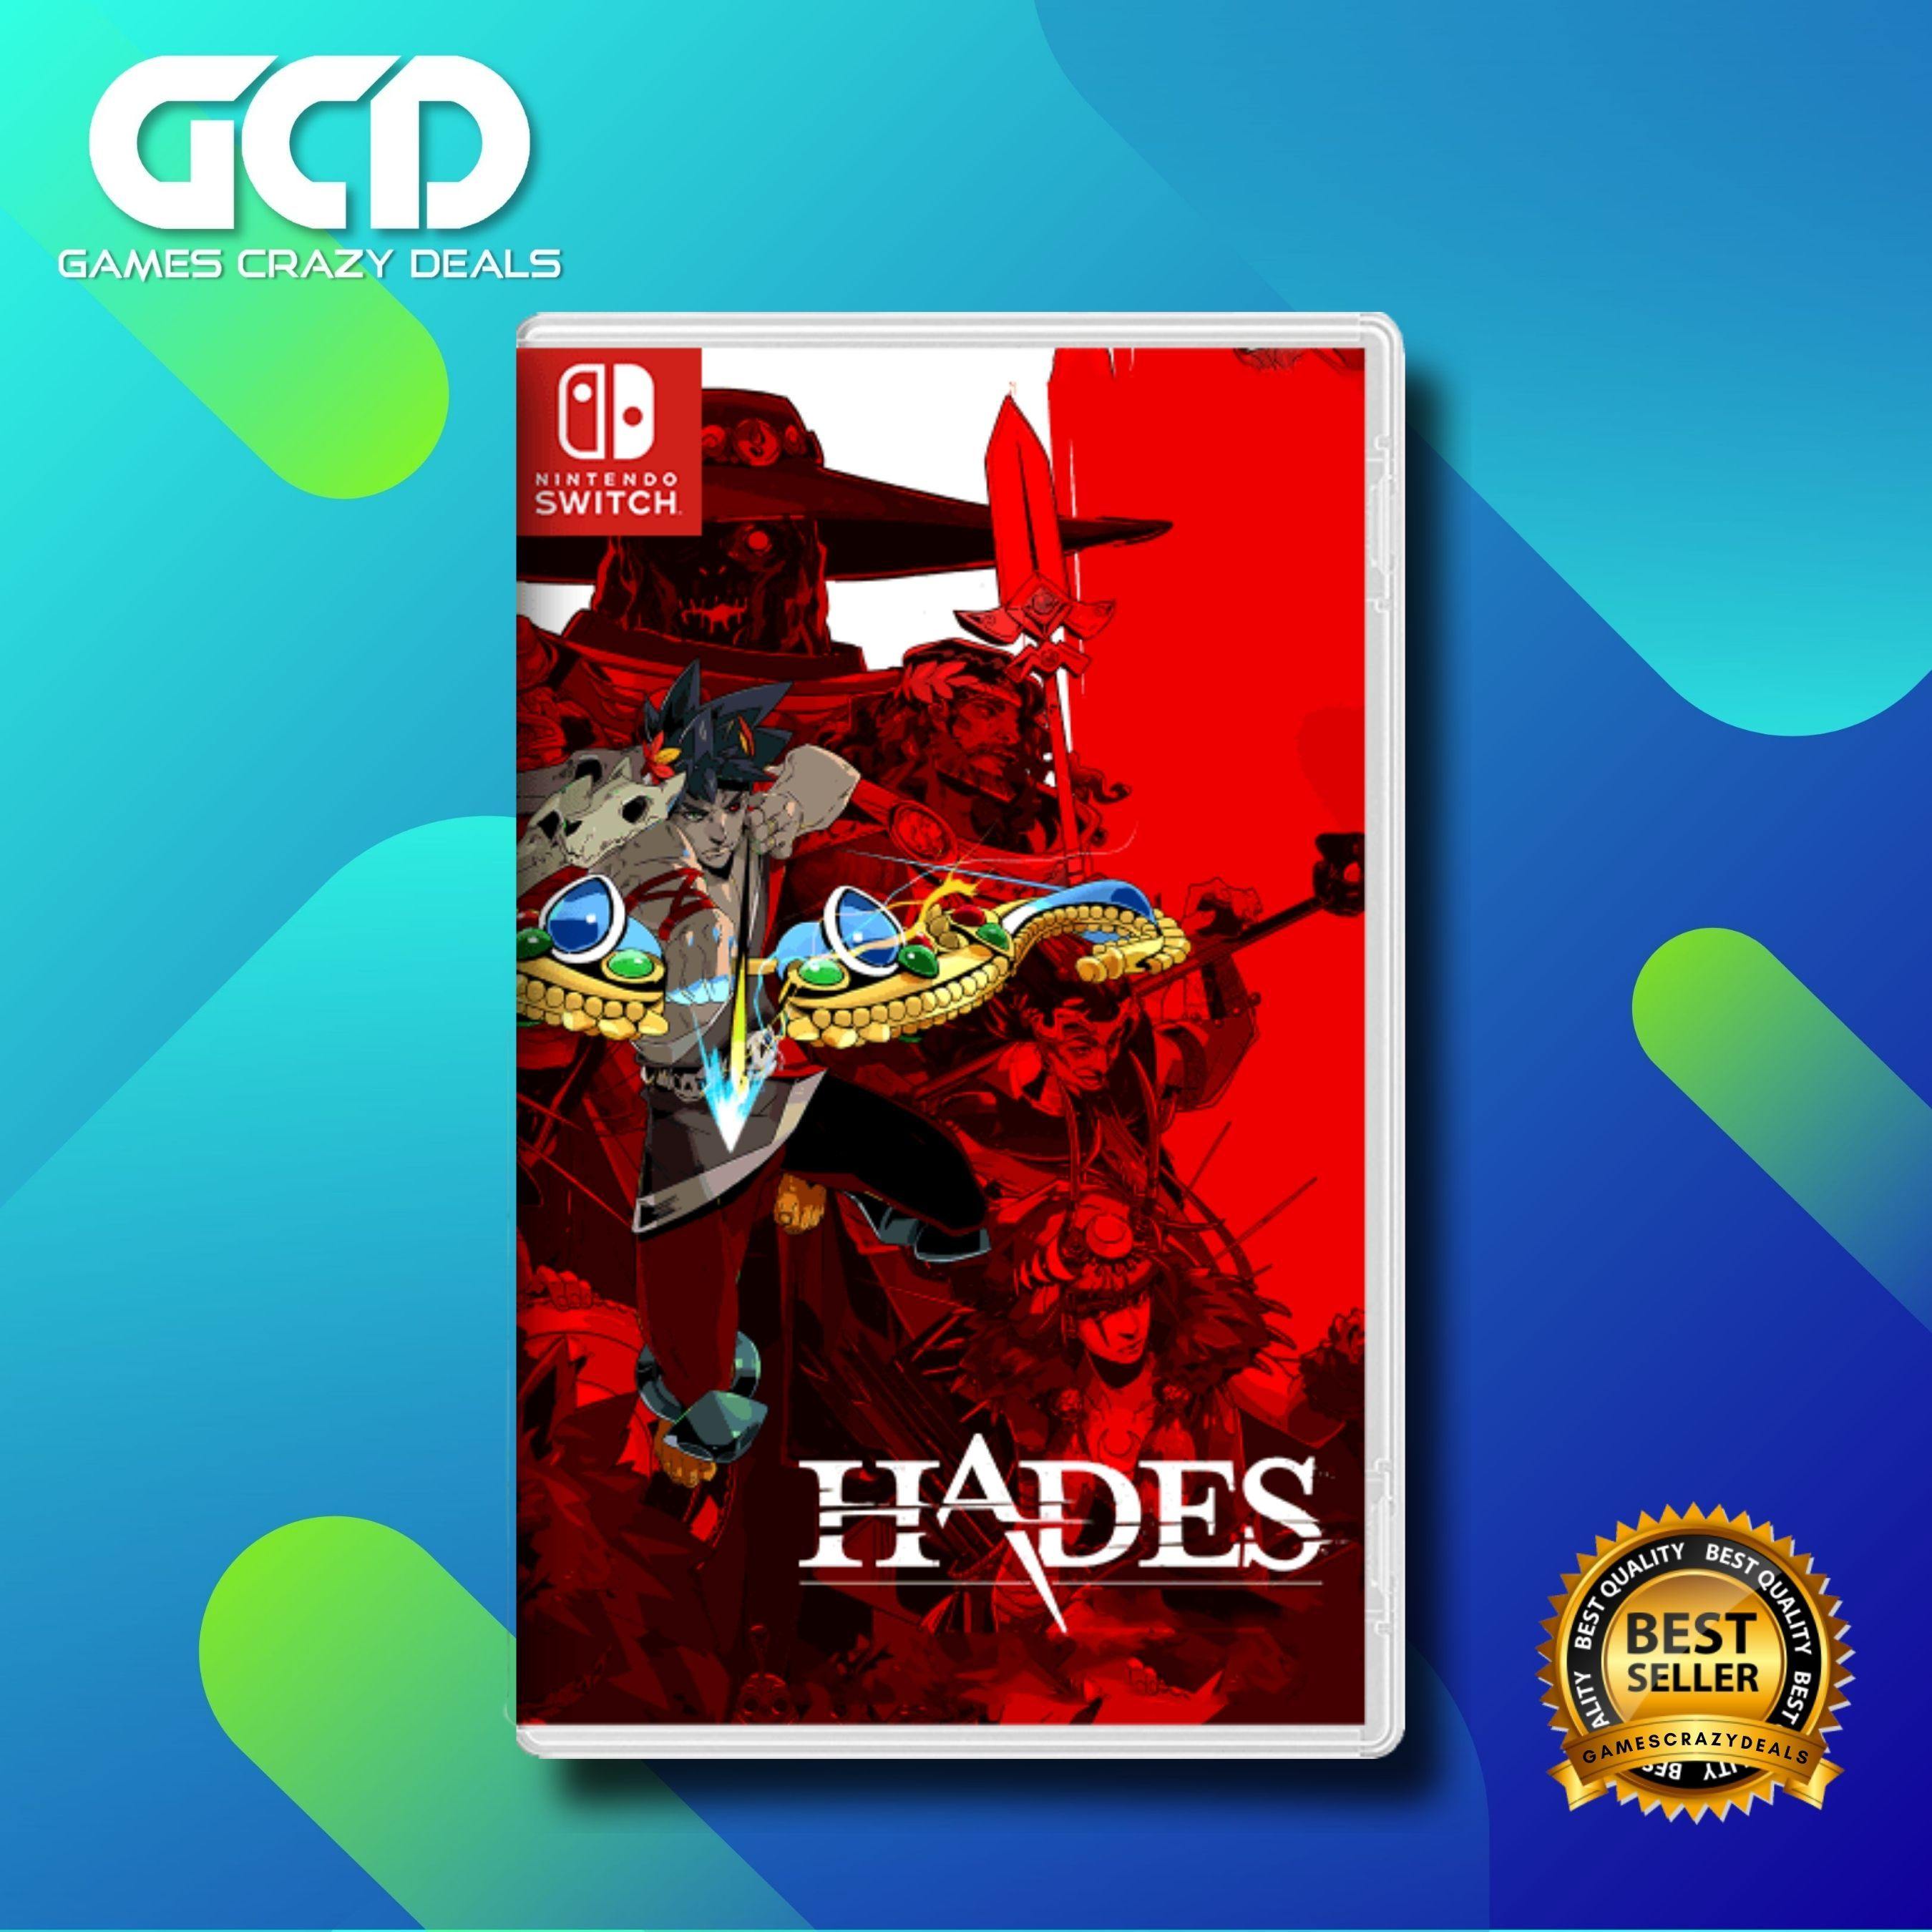 Just Shapes & Beats Custom Switch Cover : r/NintendoSwitchBoxArt